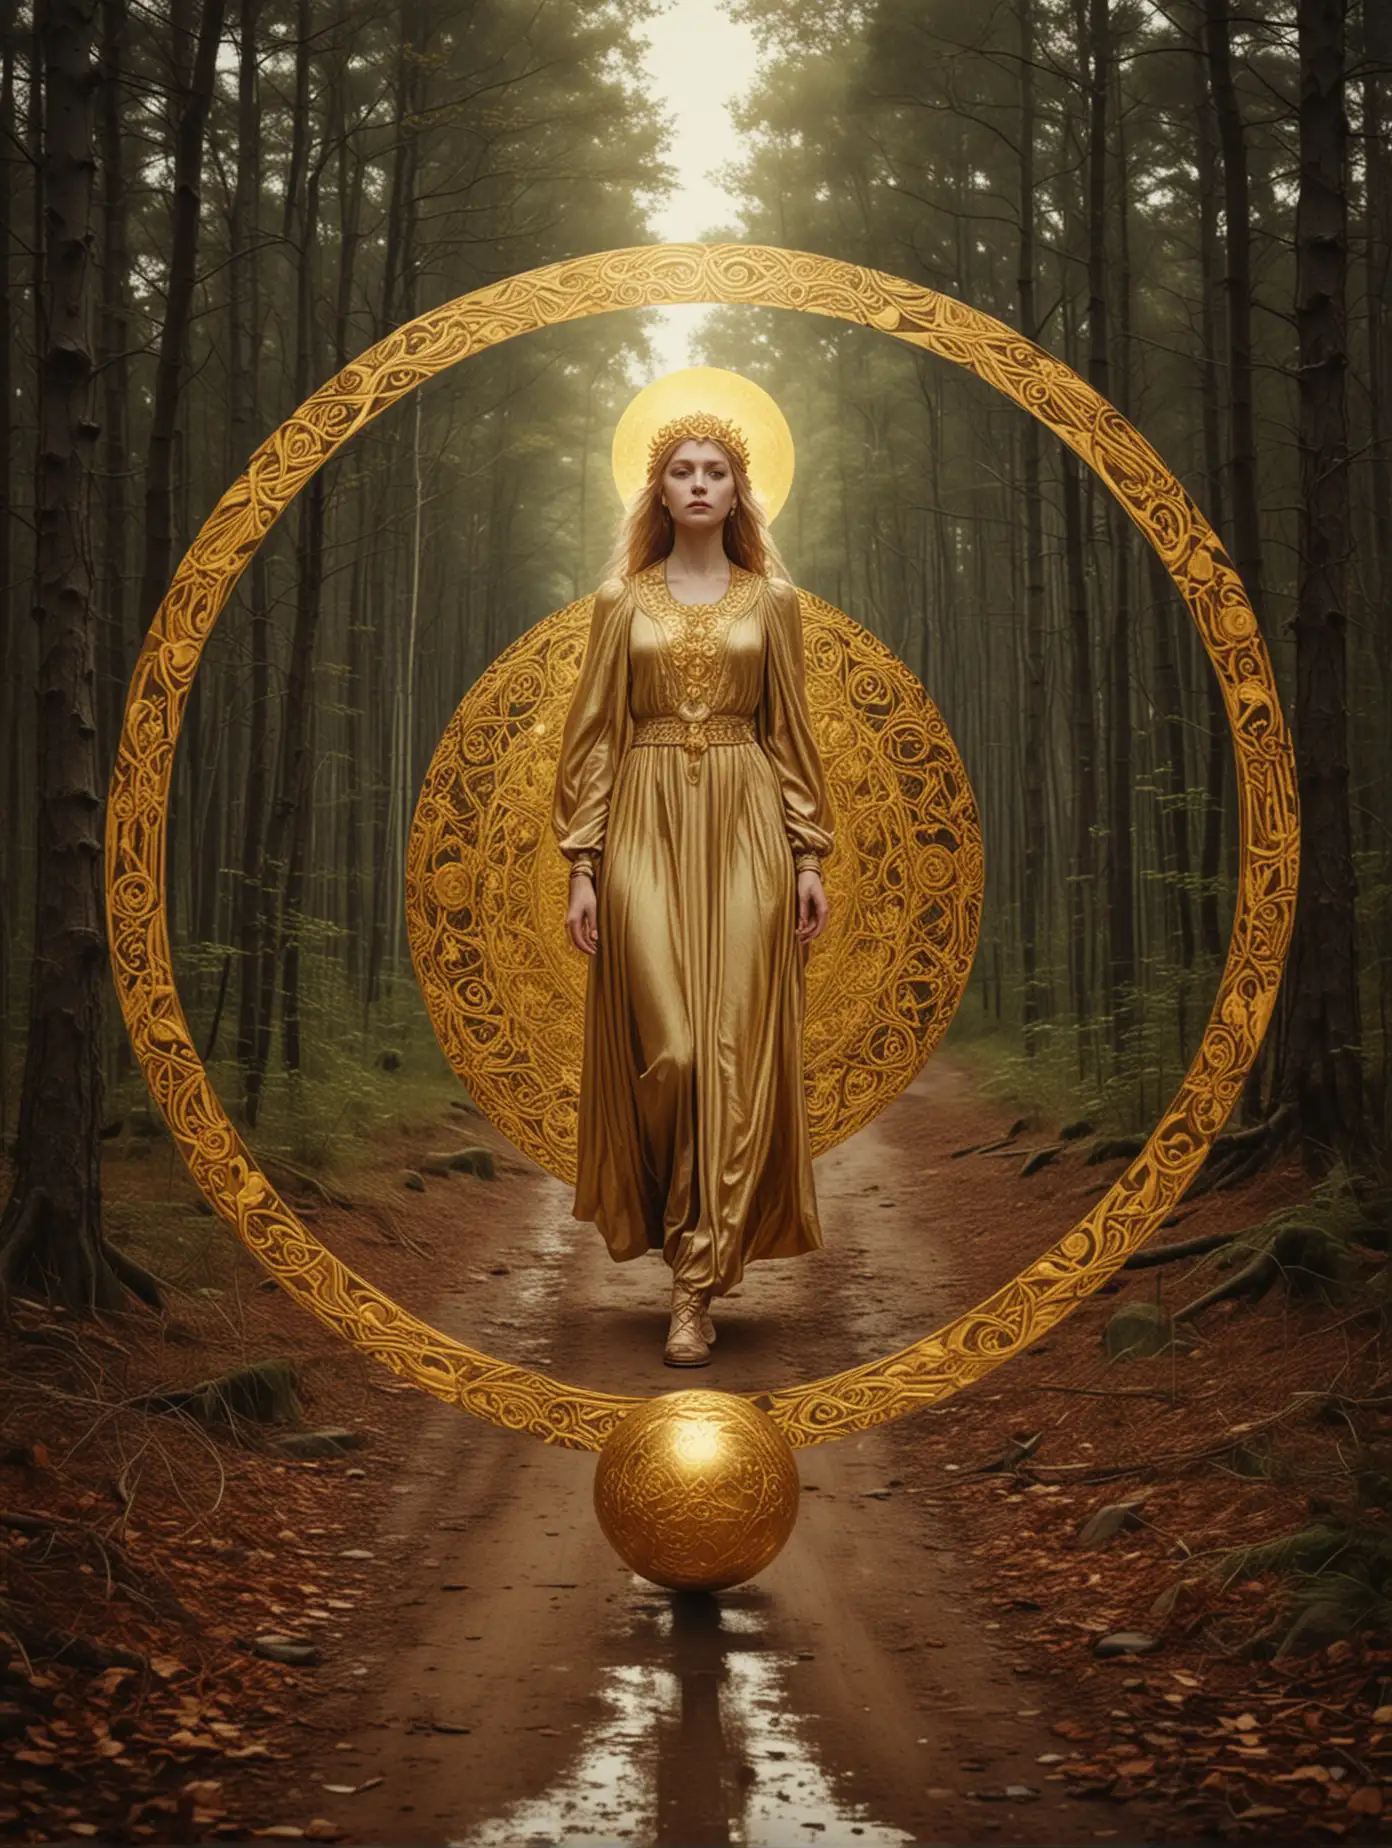 Slavic-Style-Tarot-Card-Woman-in-Gold-Journeying-Through-Forest-with-Sphere